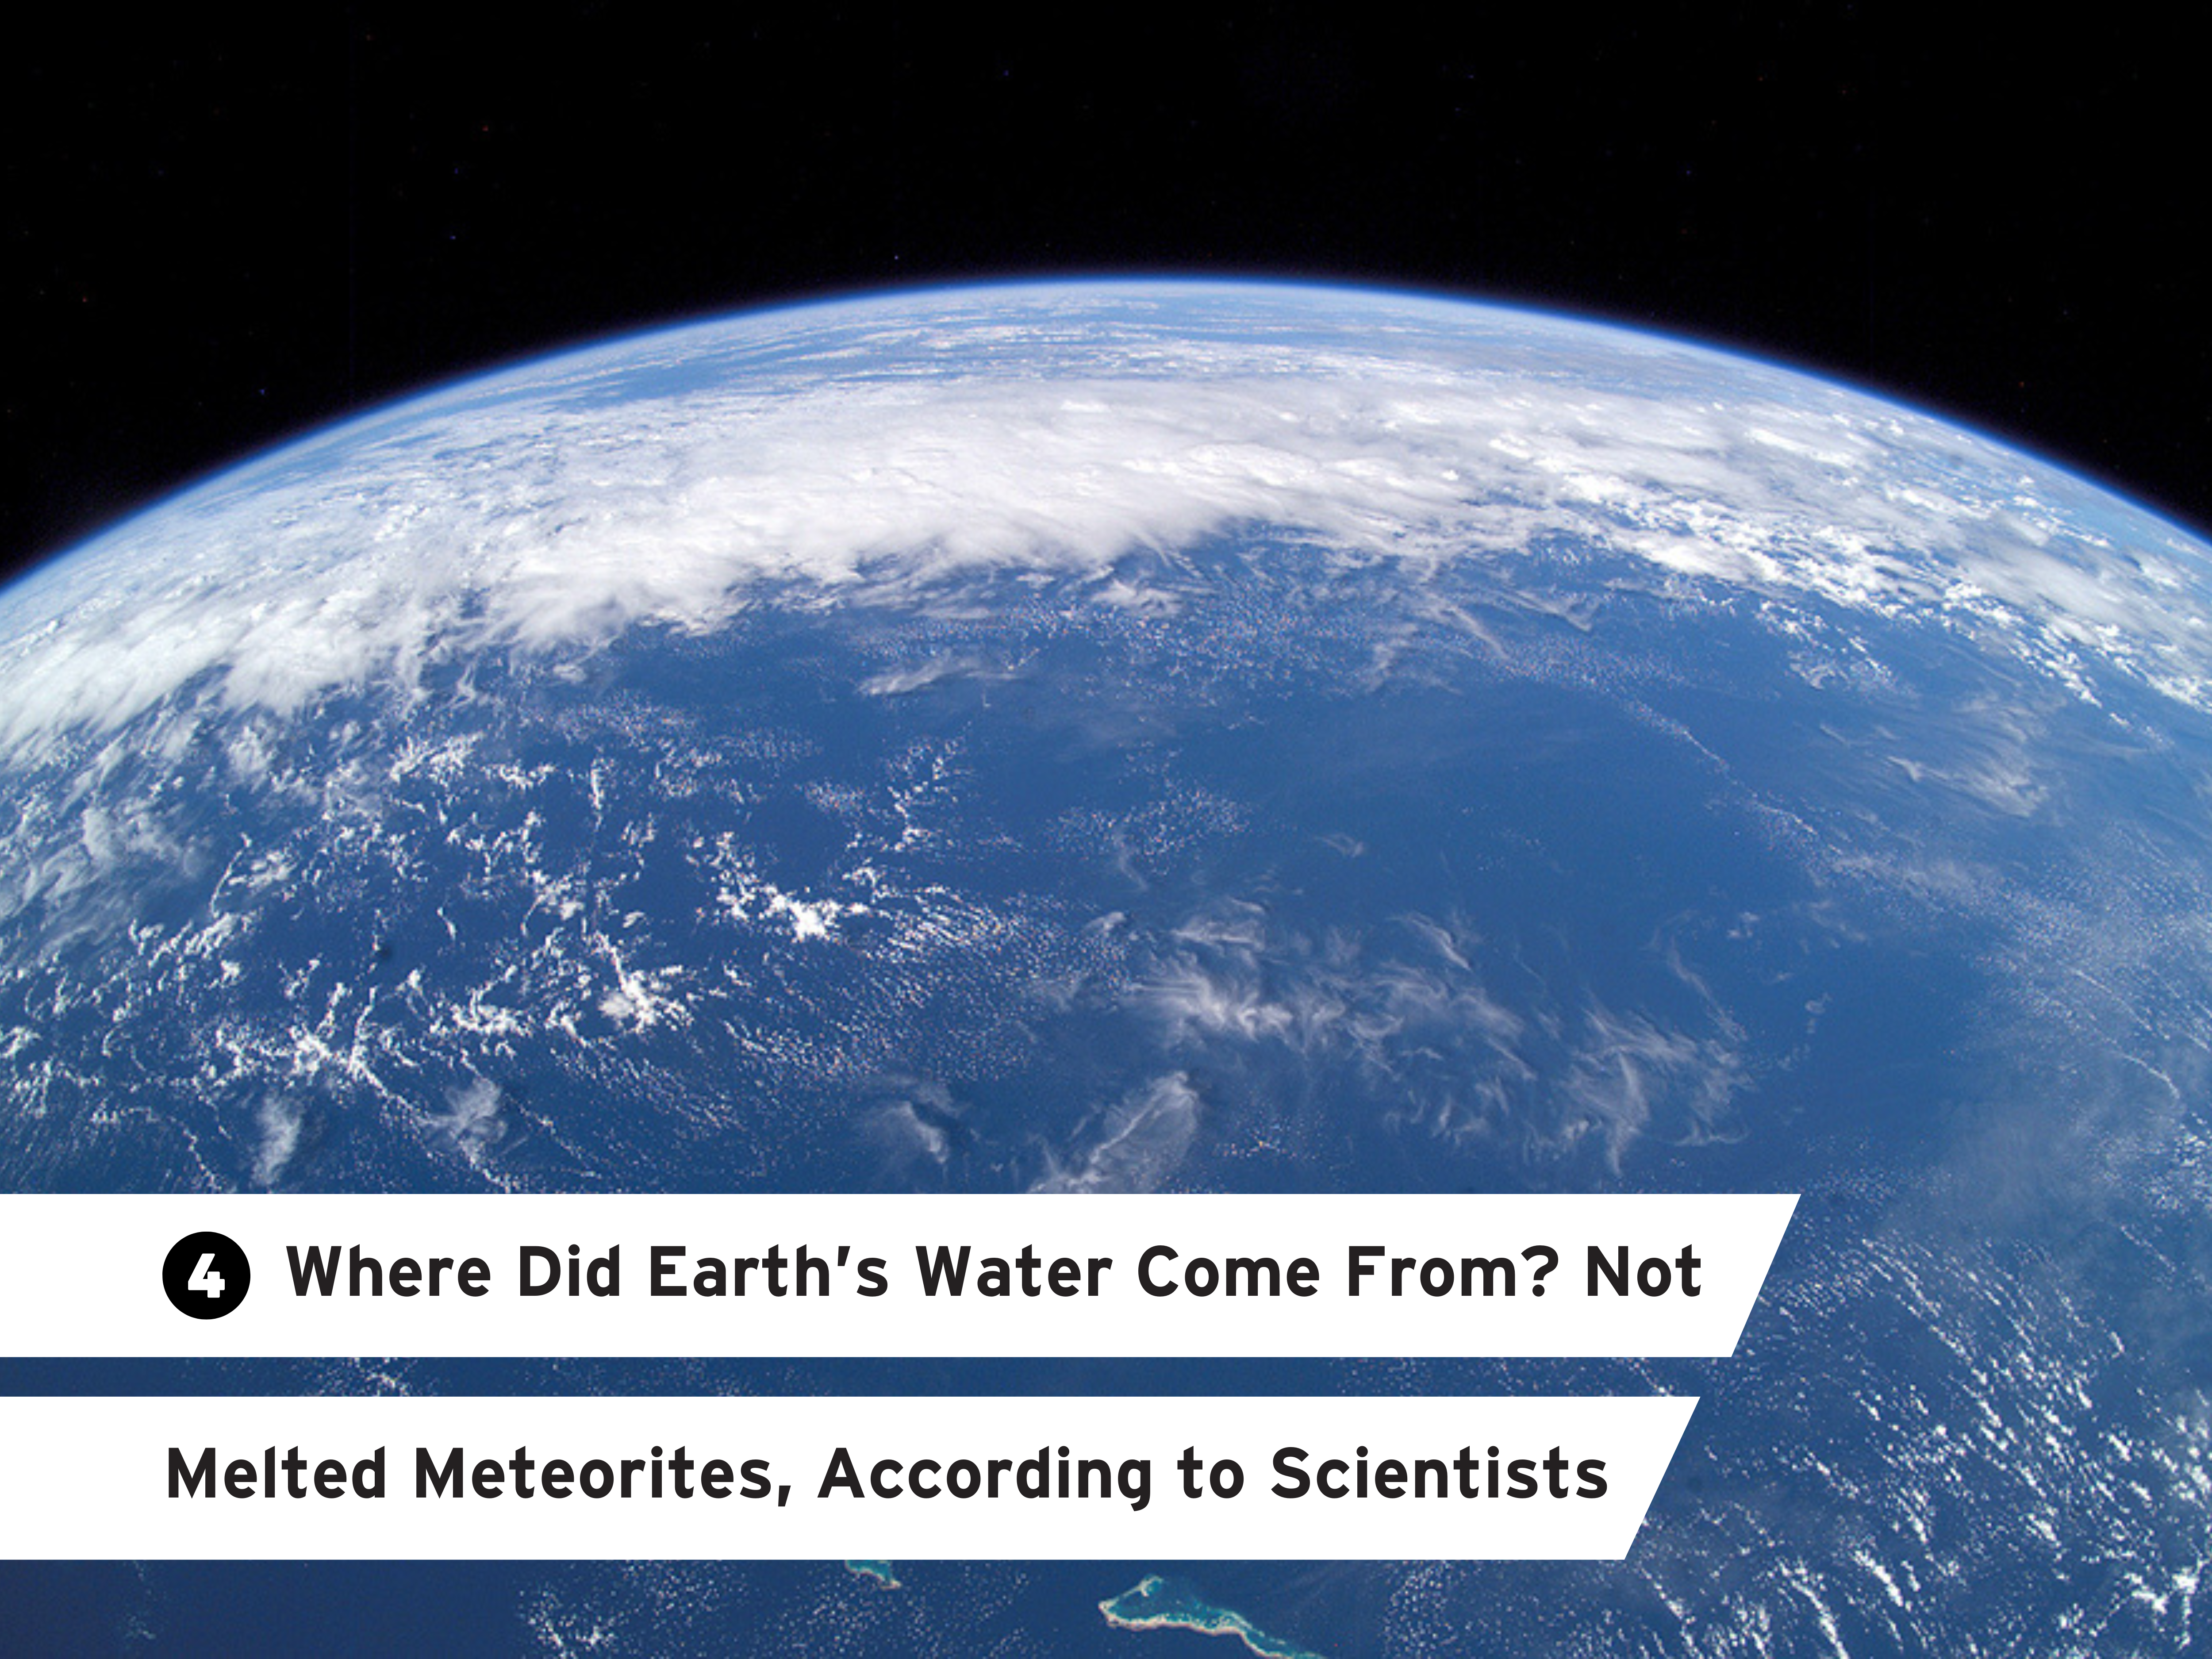 "Where Did Earth’s Water Come From? Not Melted Meteorites, According to Scientists" over a background showing Earth's oceans from space